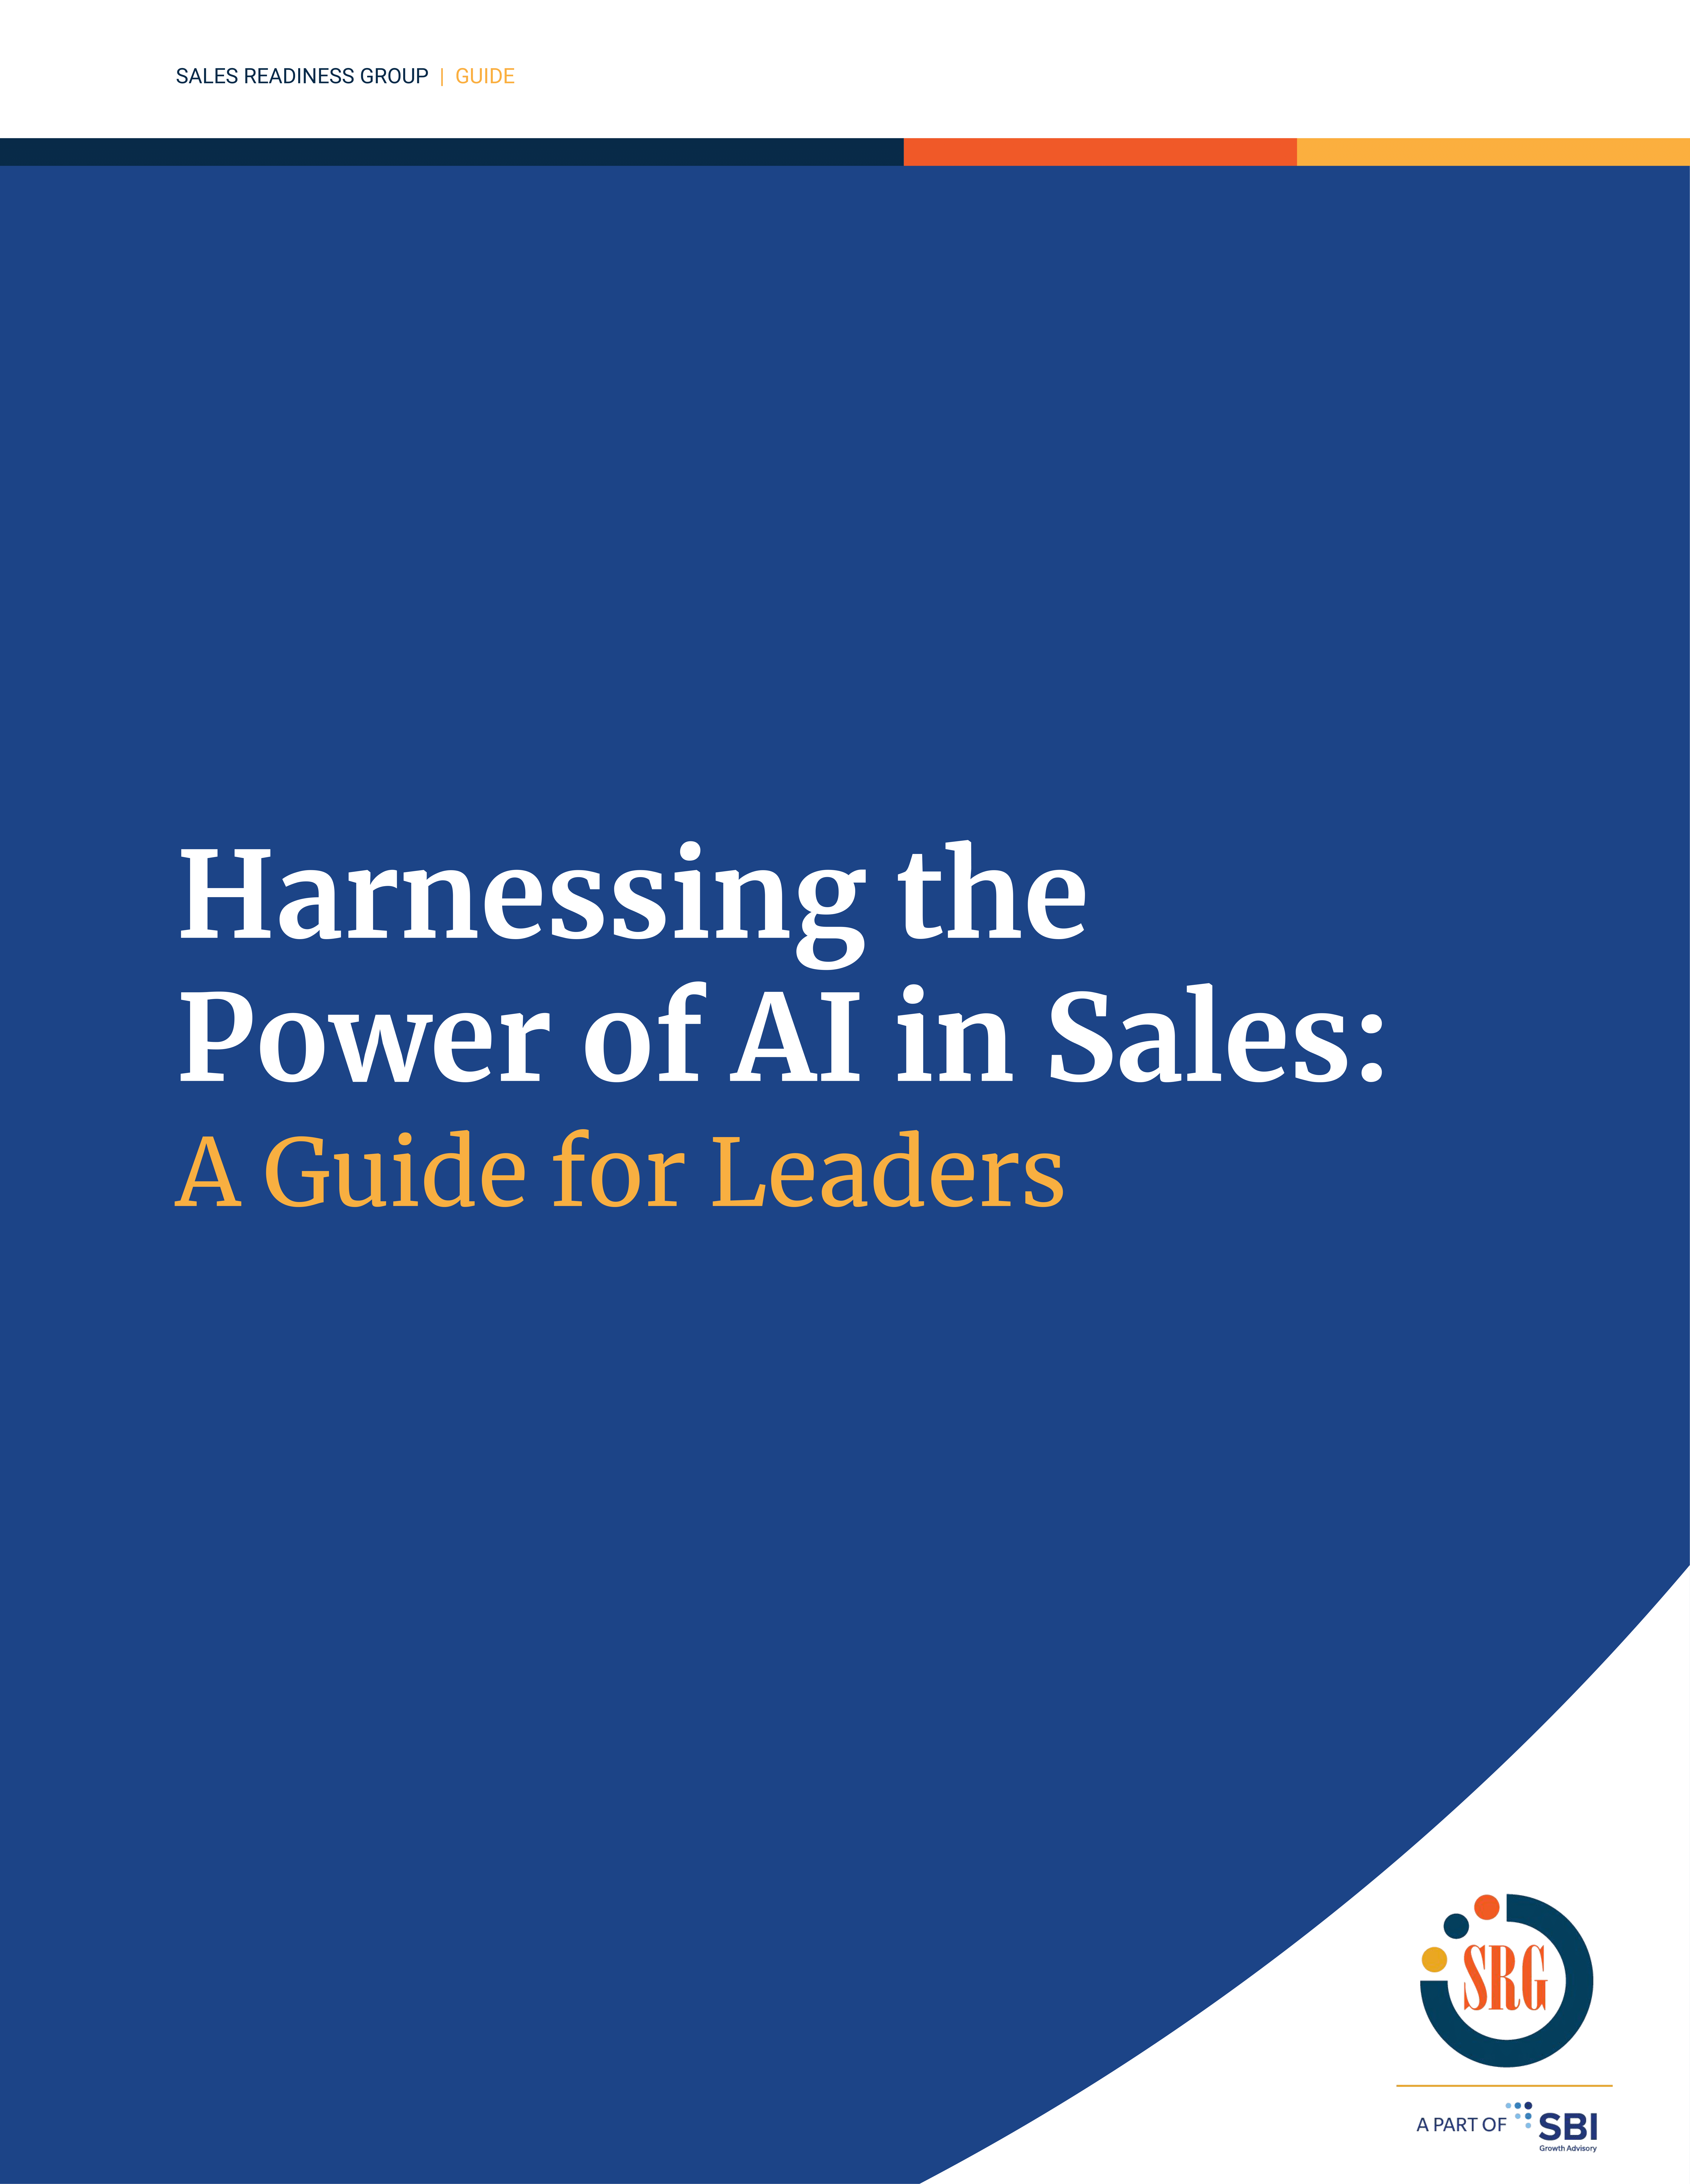 Harnessing the Power of AI in Sales | A Guide for Leaders